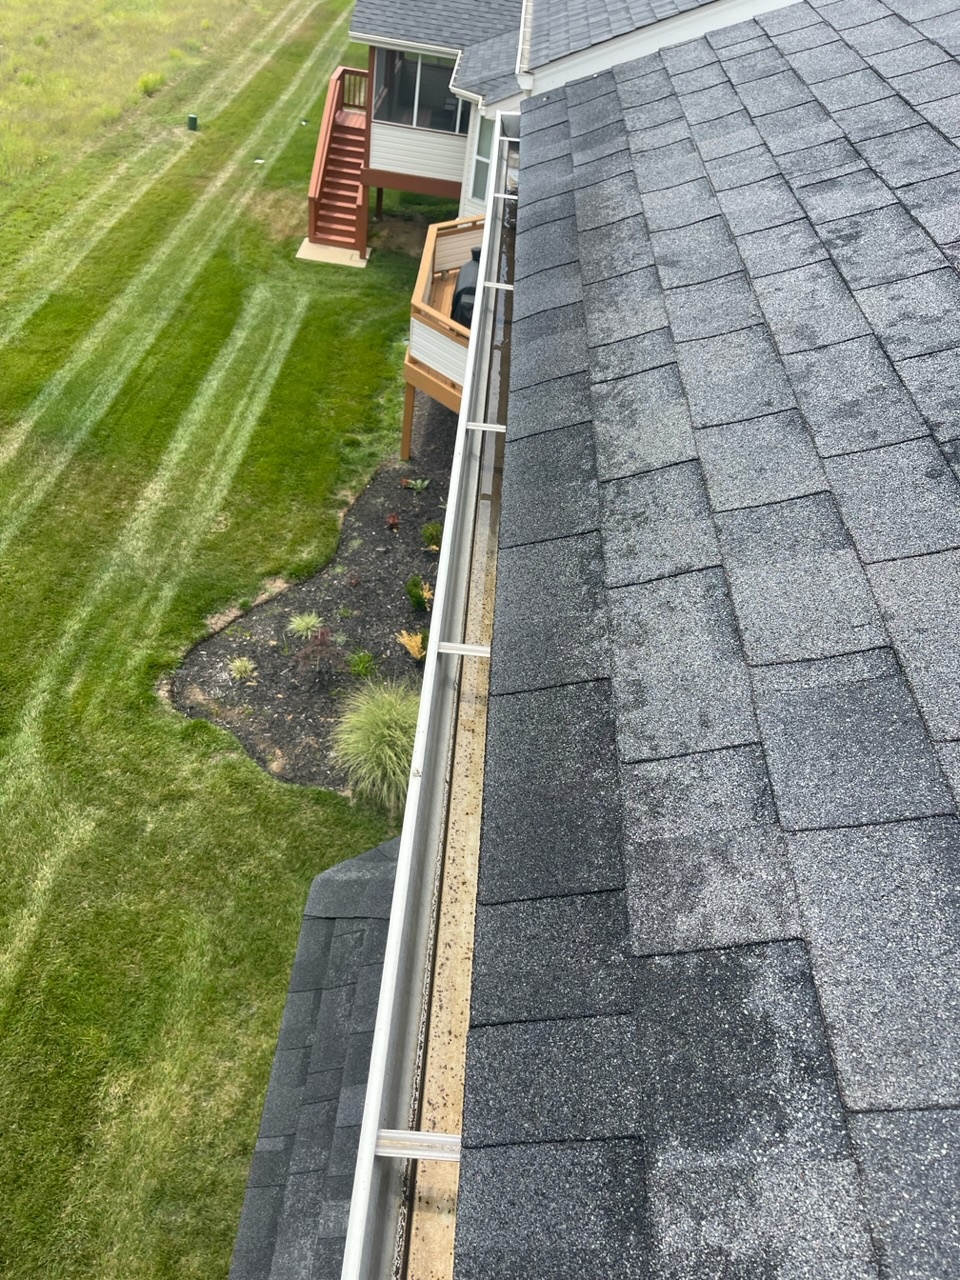 Toms River Gutter Cleaning in Doris home.